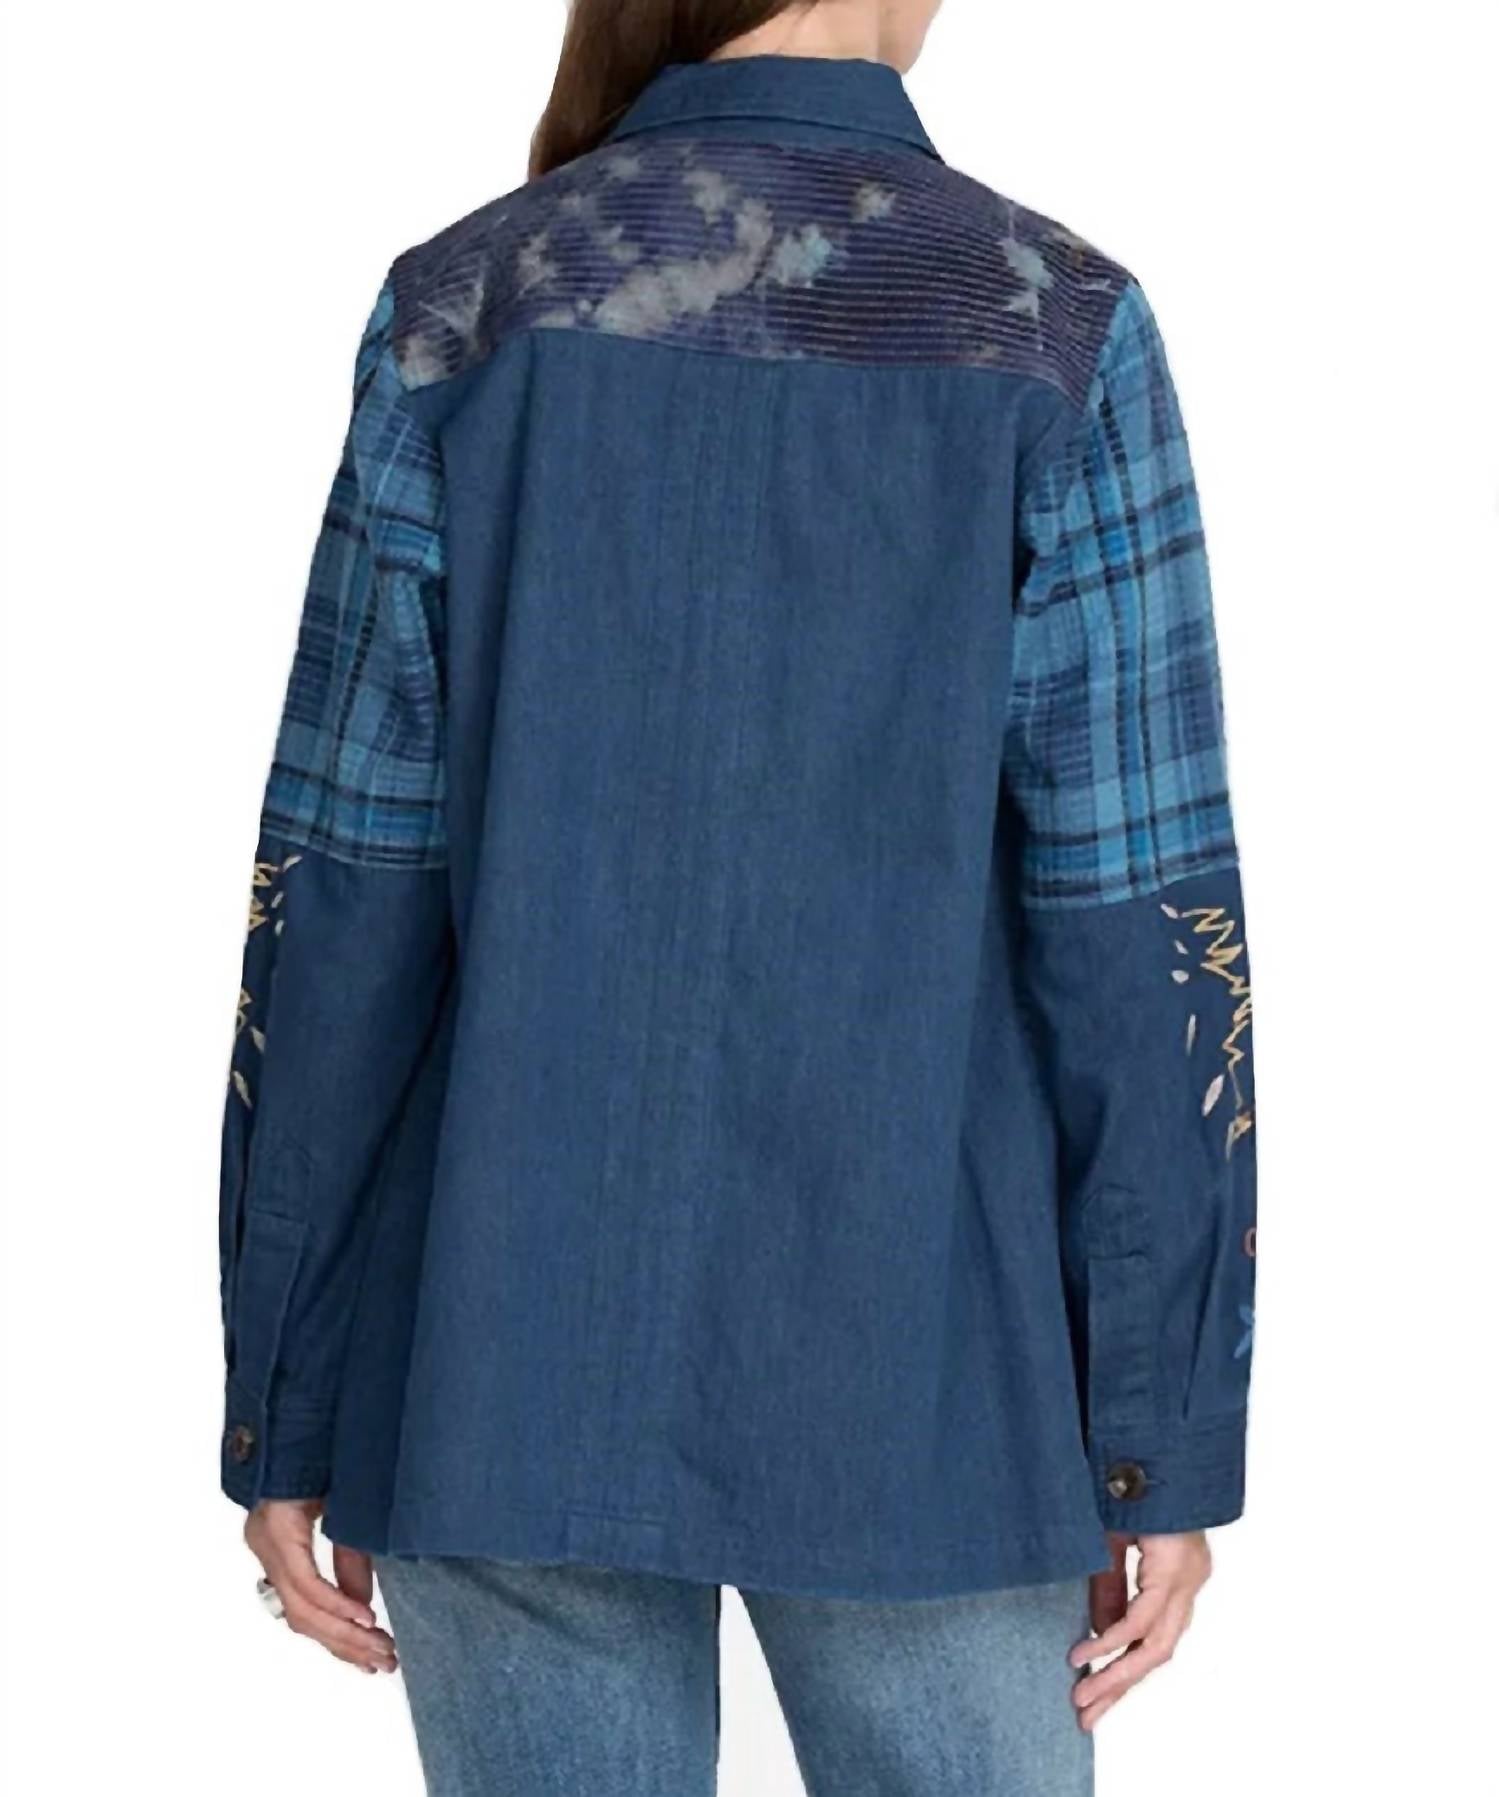 Johnny Was - Moonlight Tie Dye Patchwork Military Jacket